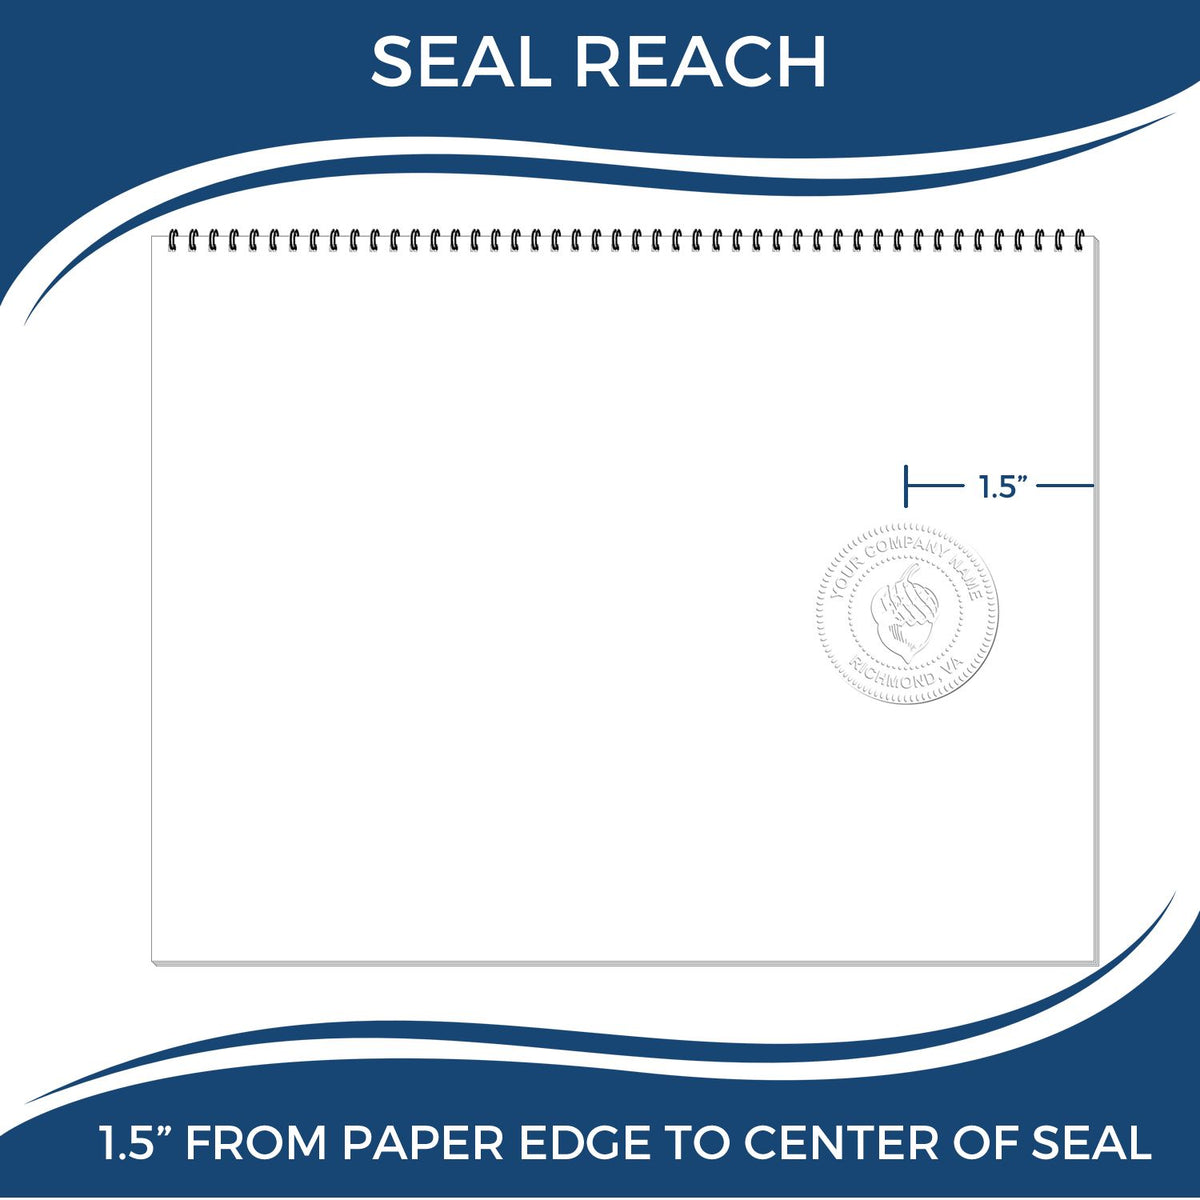 An infographic showing the seal reach which is represented by a ruler and a miniature seal image of the State of Tennessee Architectural Seal Embosser